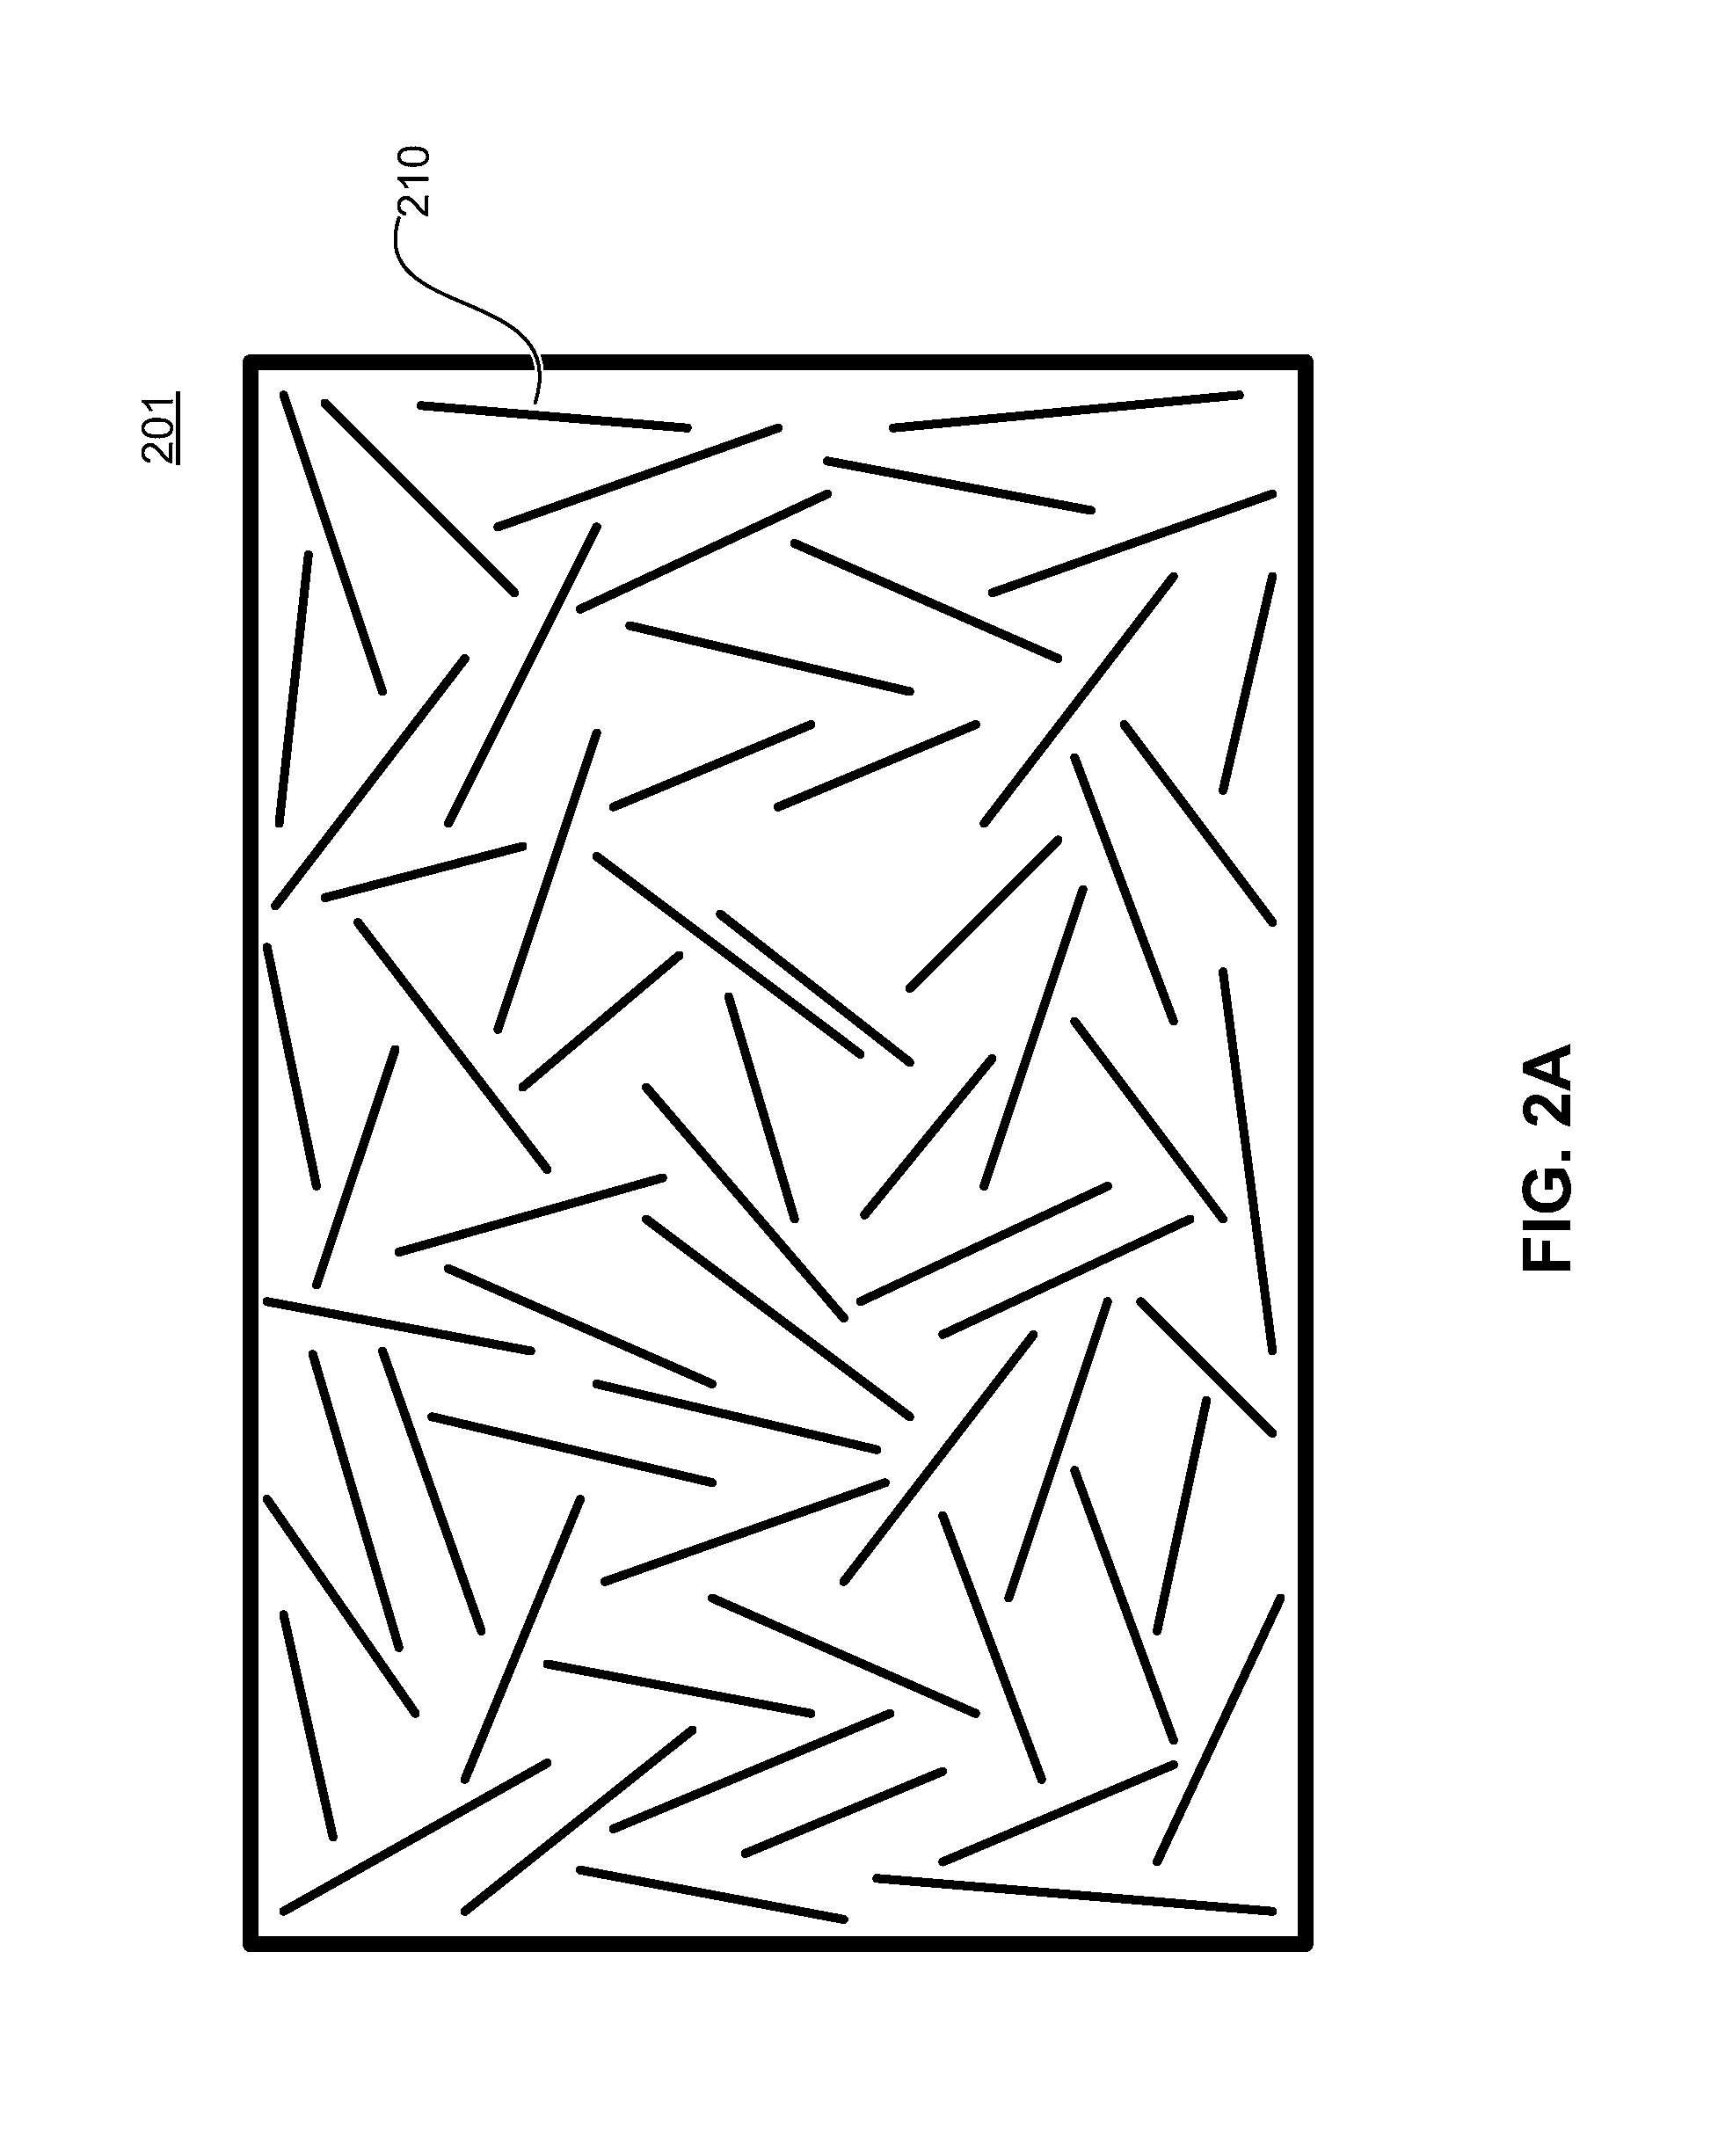 Methods for arranging nanoscopic elements within networks, fabrics, and films